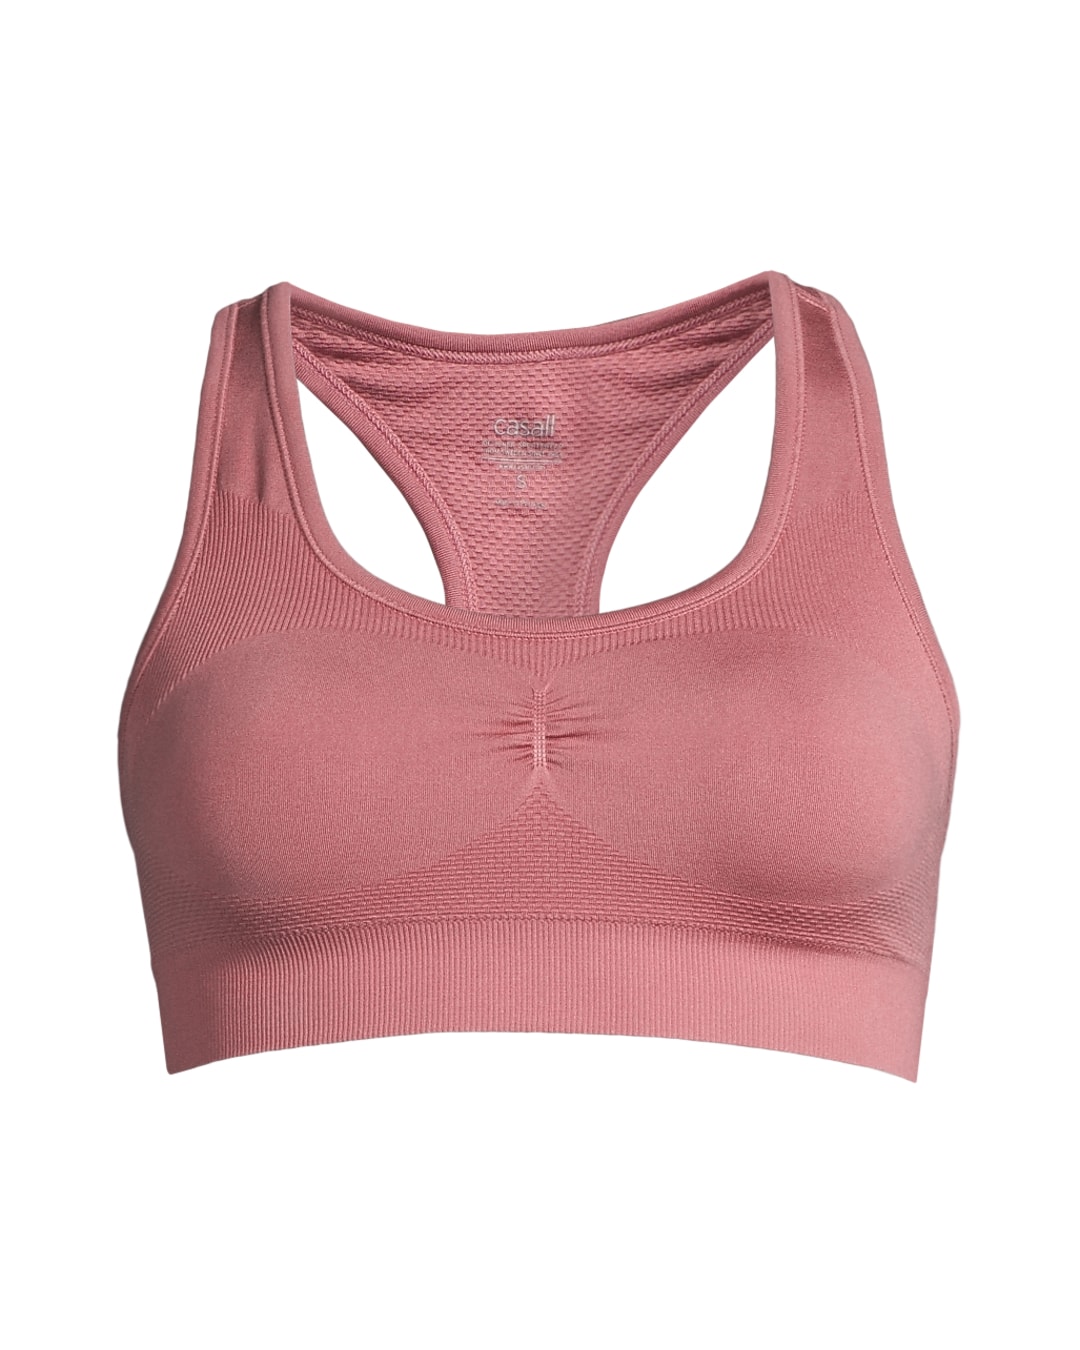 https://www.tights.no/wp-content/uploads/sites/7/2020/02/Casall-Smooth-sports-bra-Calming-Red-1.jpg